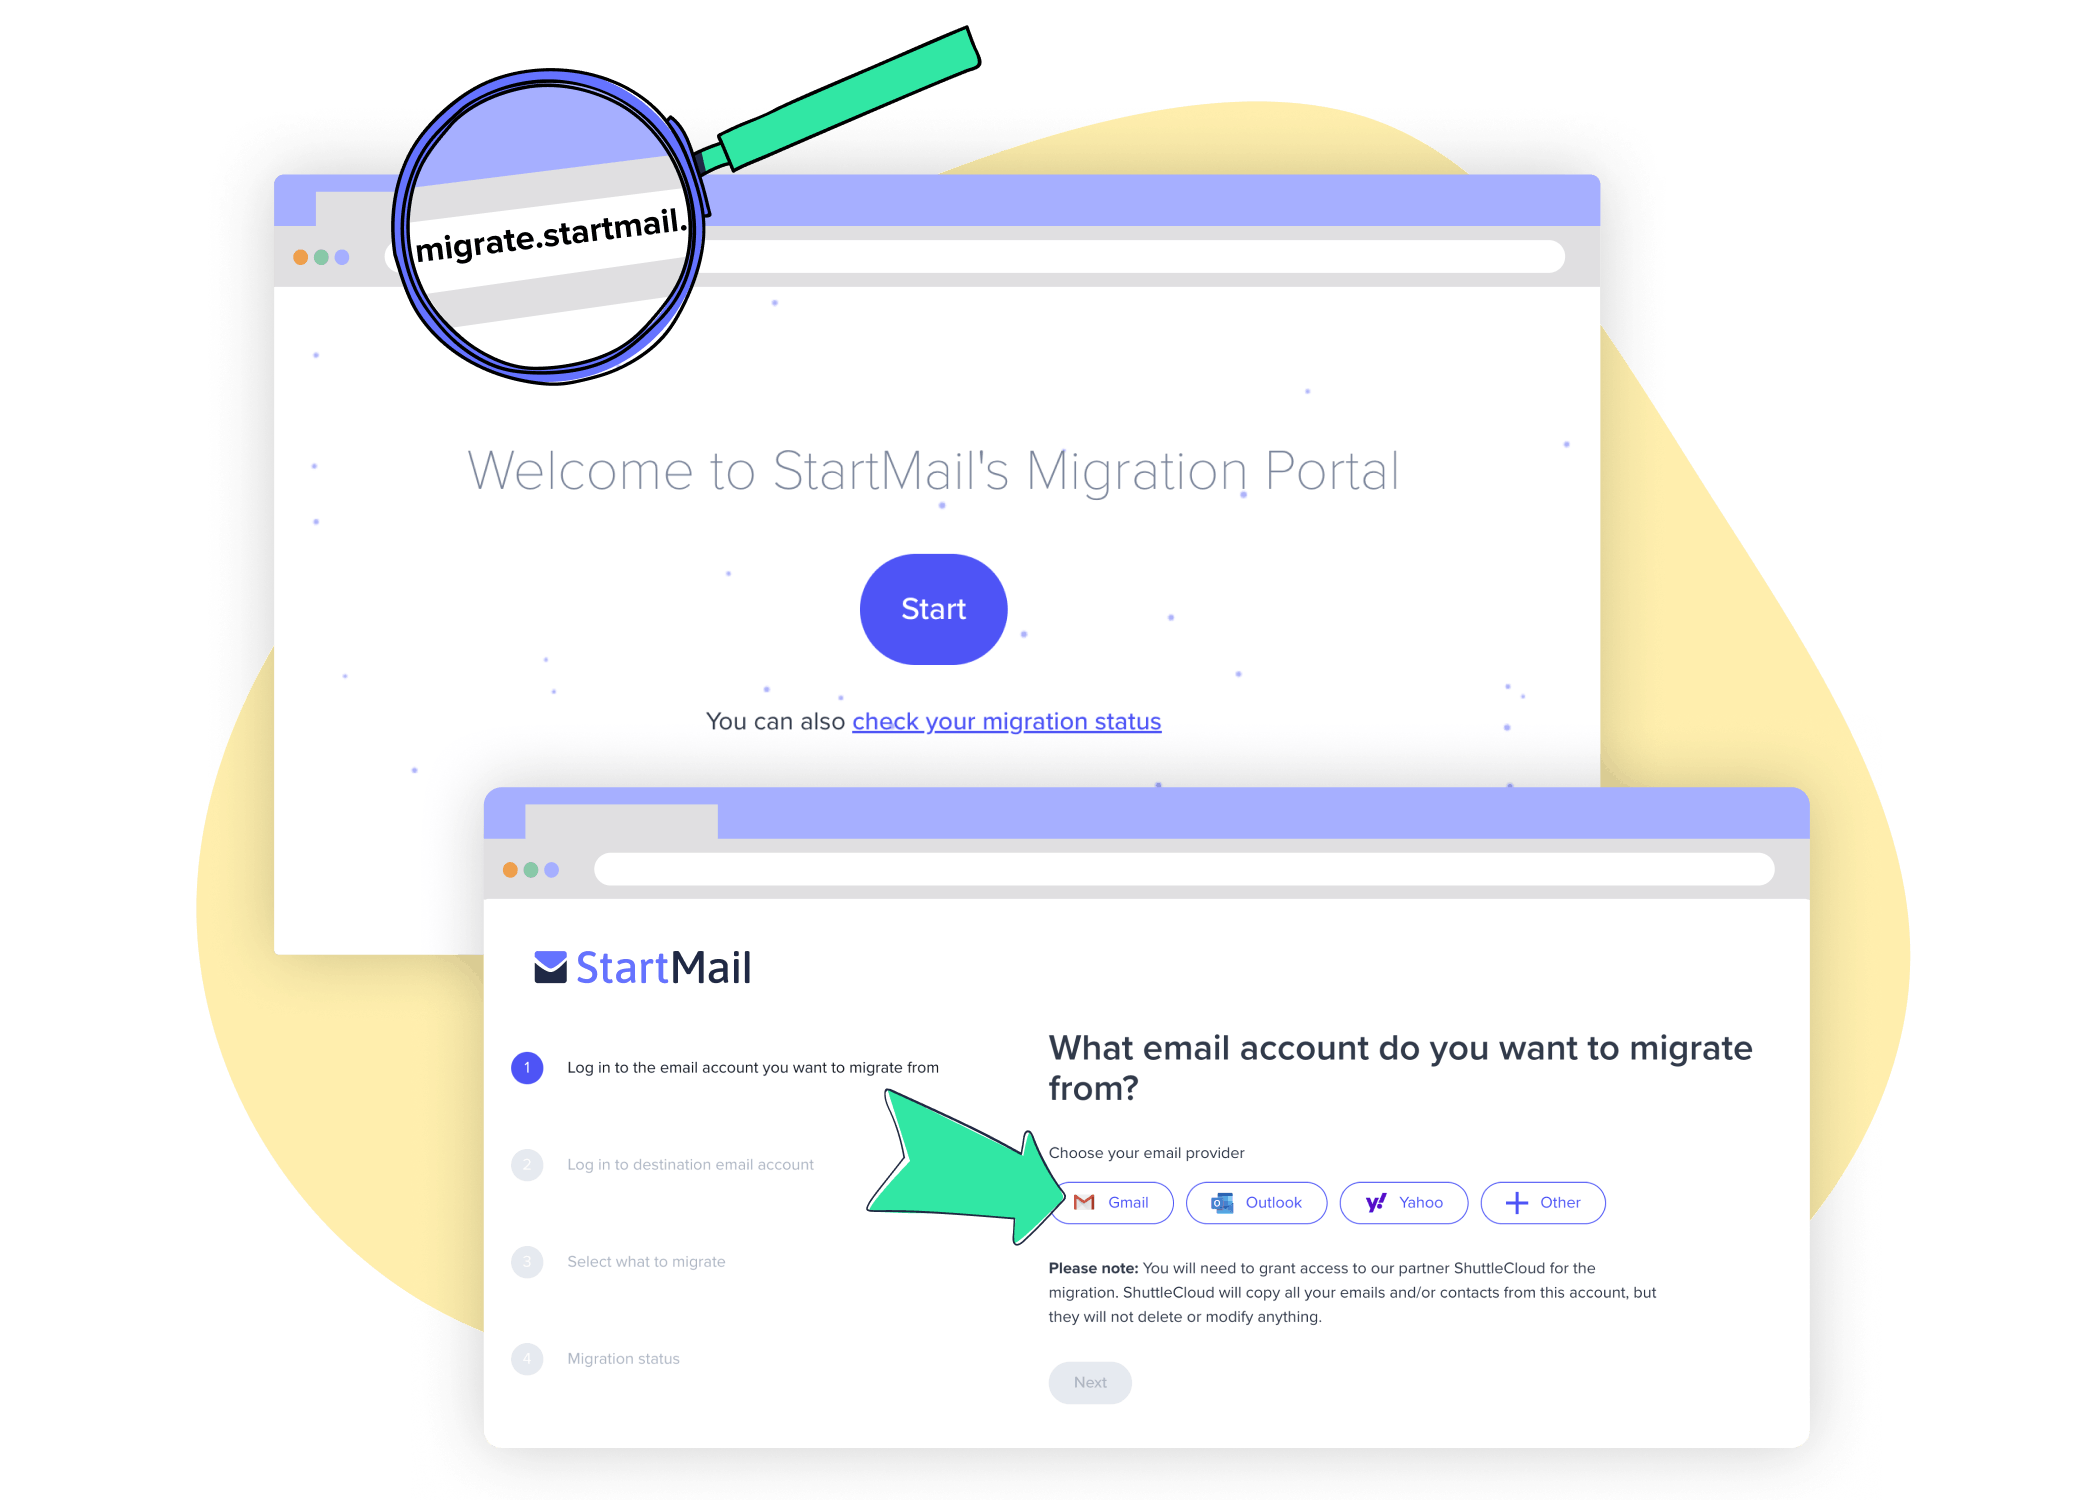 Two StartMail interfaces, the first says 'Welcome to StartMail's Migration Portal. The second says 'What email account do you want to migrate from? It shows different logos from email clients, such as Gmail, Outlook and Yahoo.